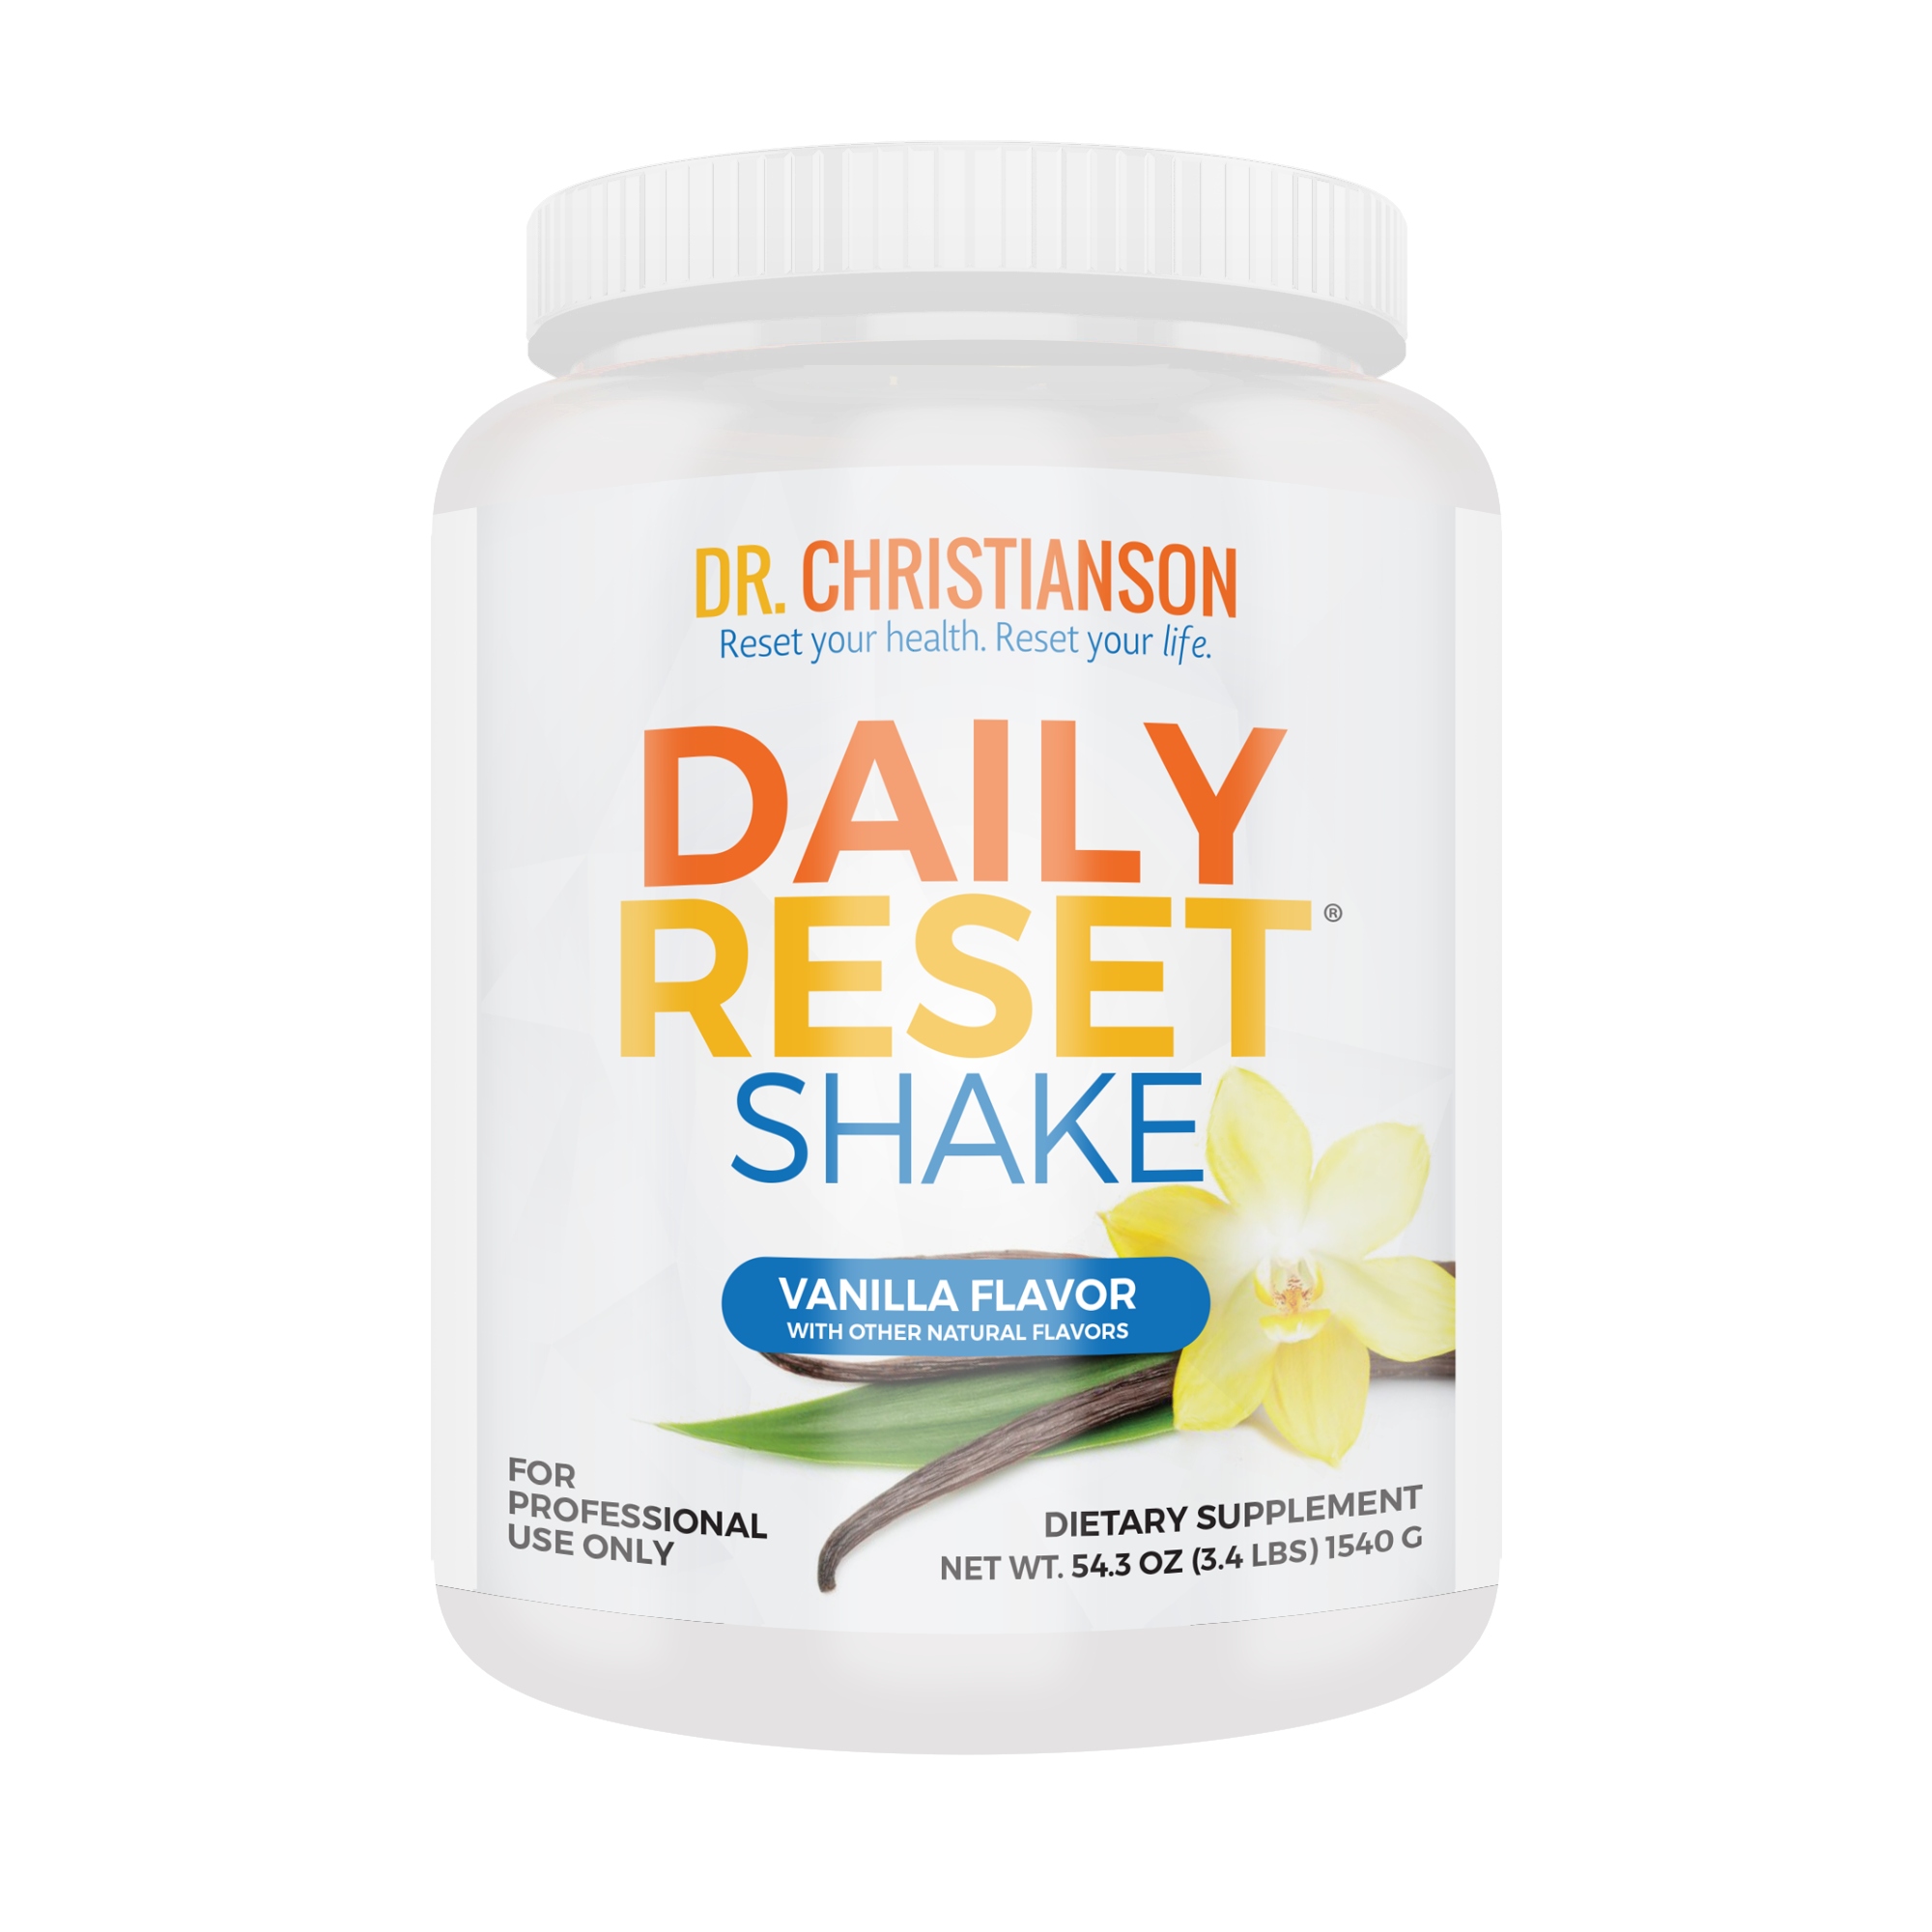 Daily Reset Shake – Vanilla or Chocolate - Chocolate is out of stock